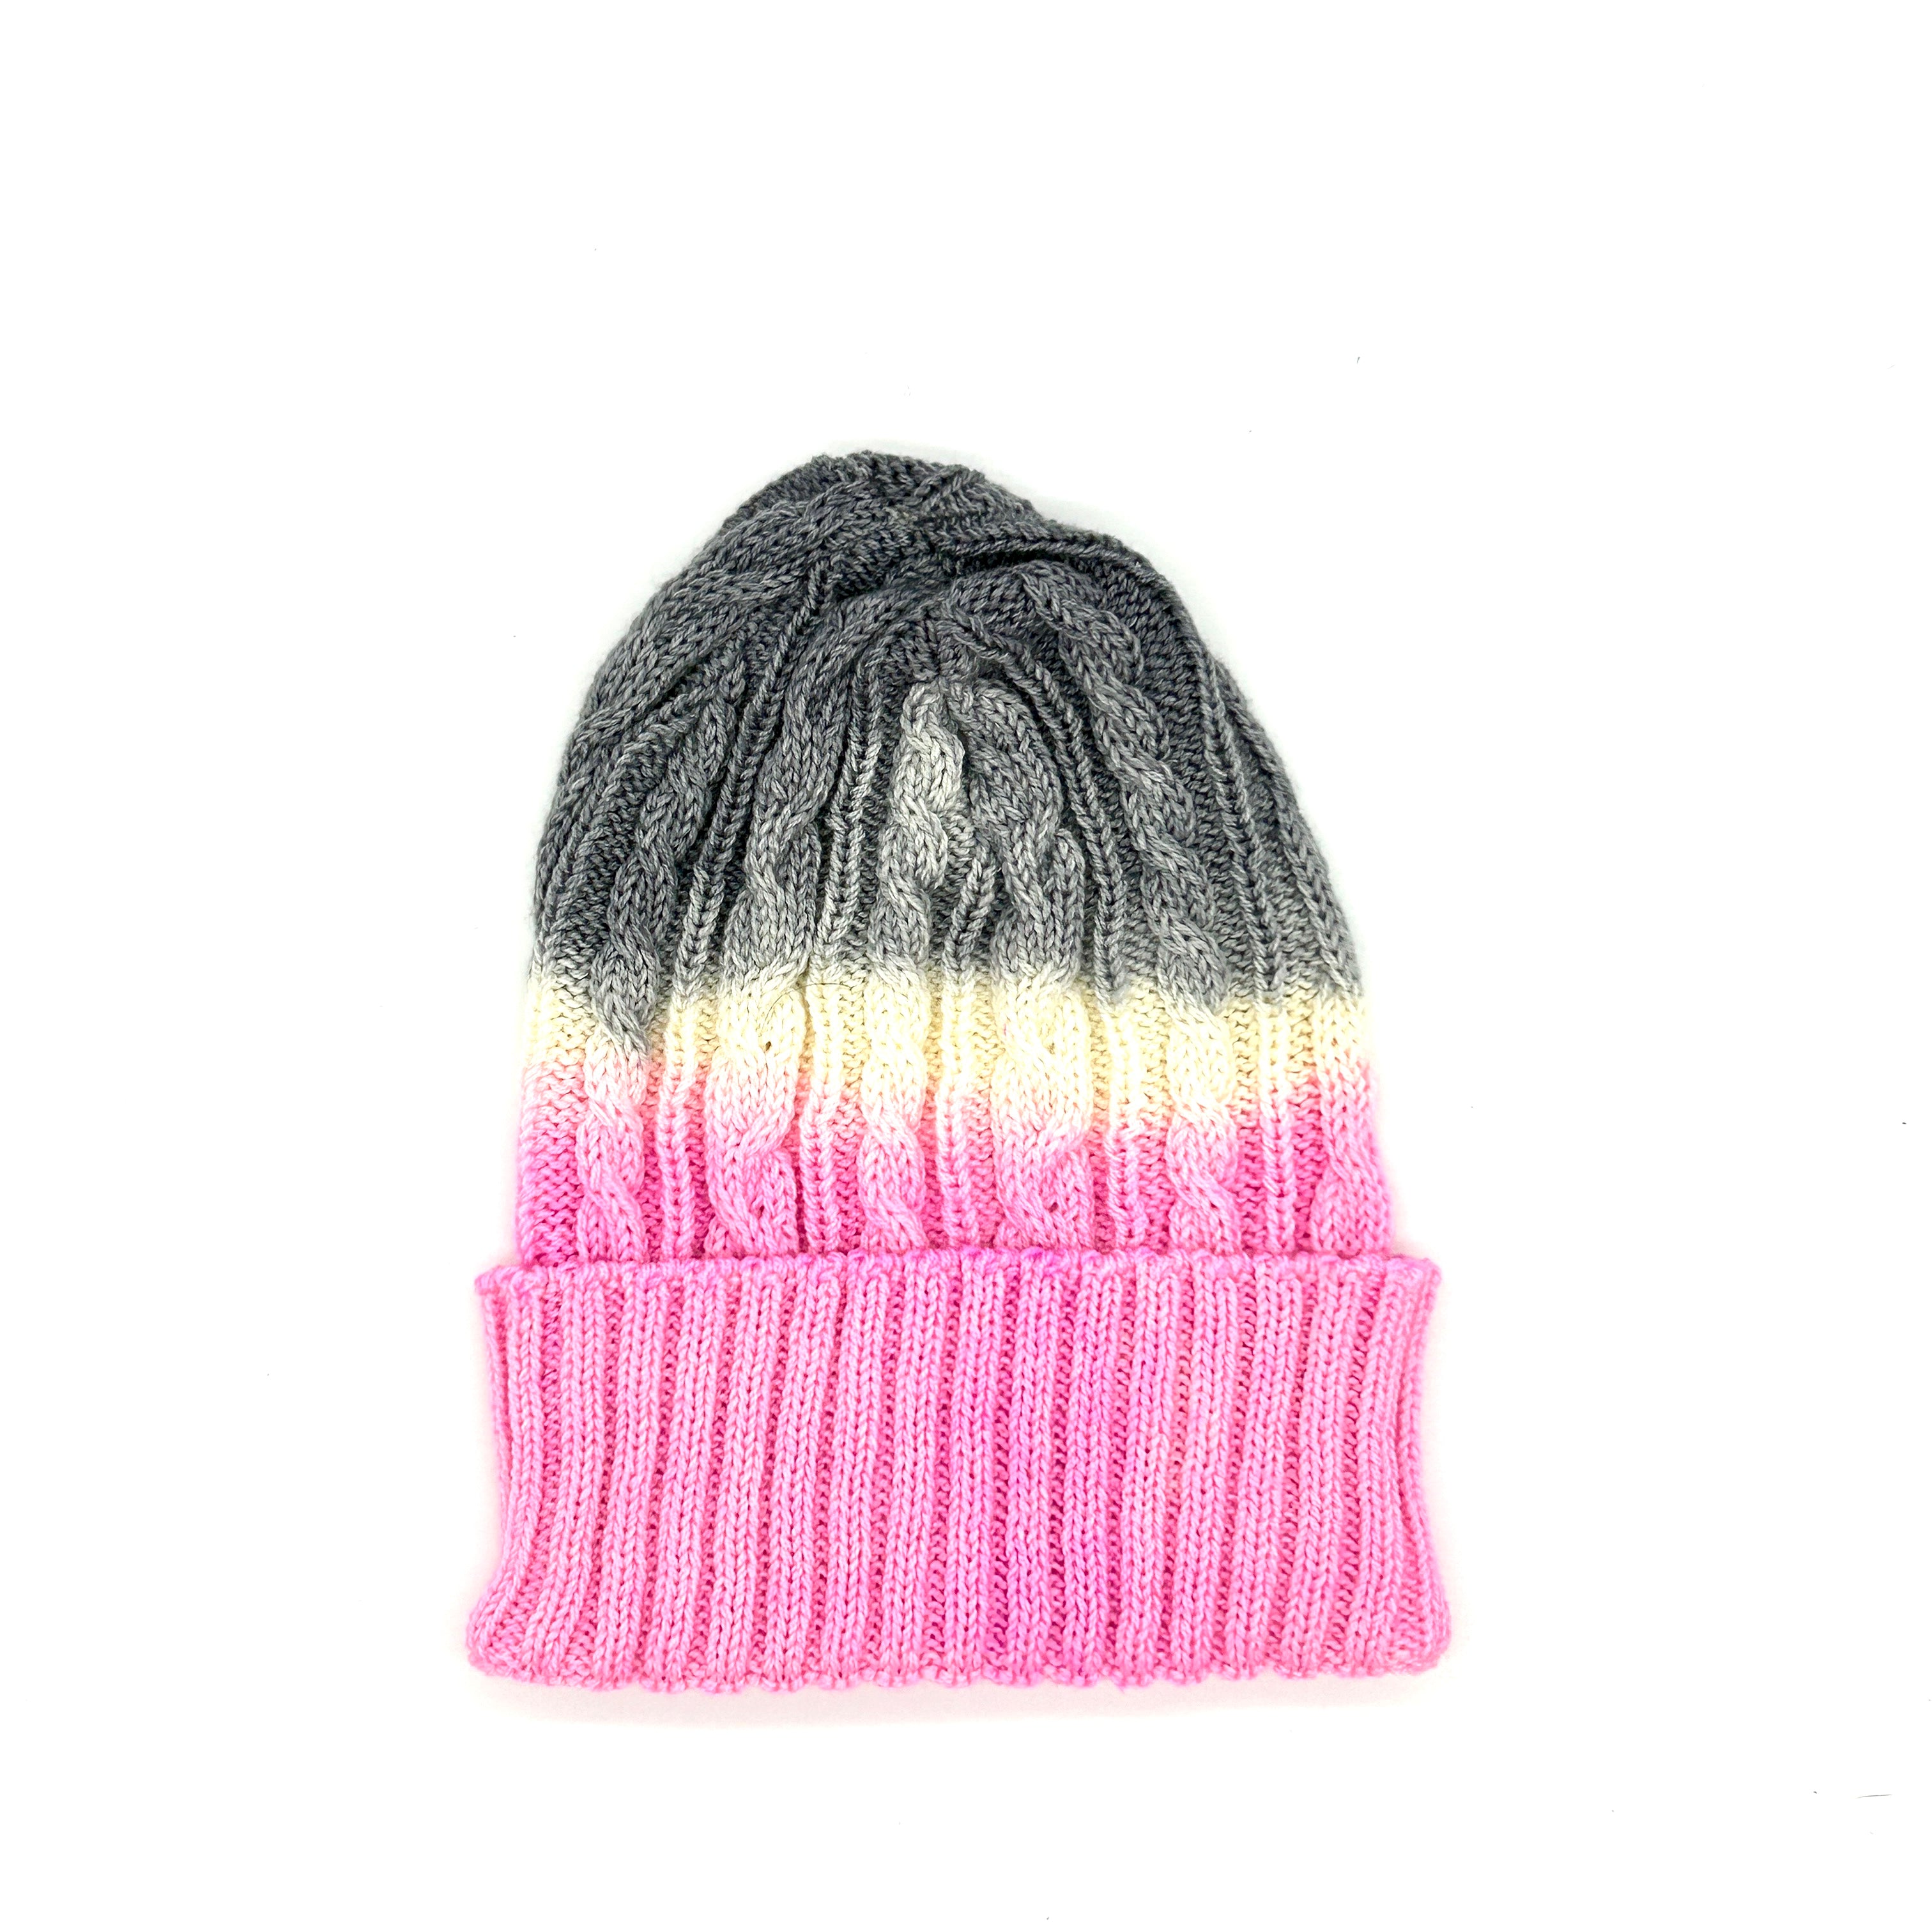 Hats-Live Love Lead Beanies-WOOLTRIBE